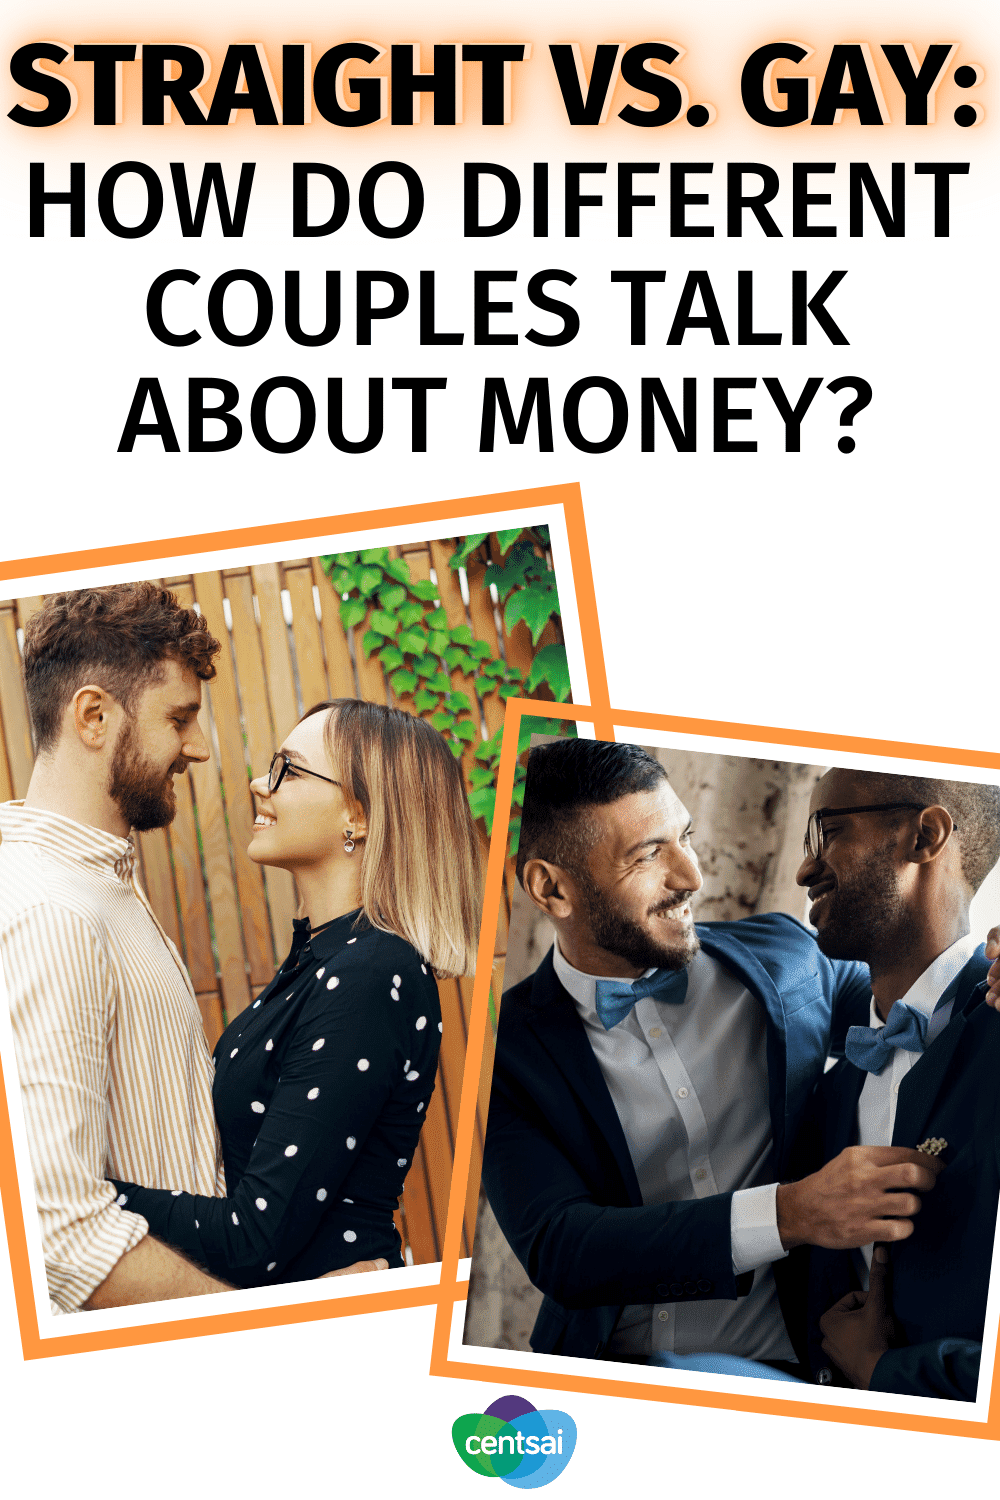 Straight vs. Gay How Do Different Couples Talk About Money